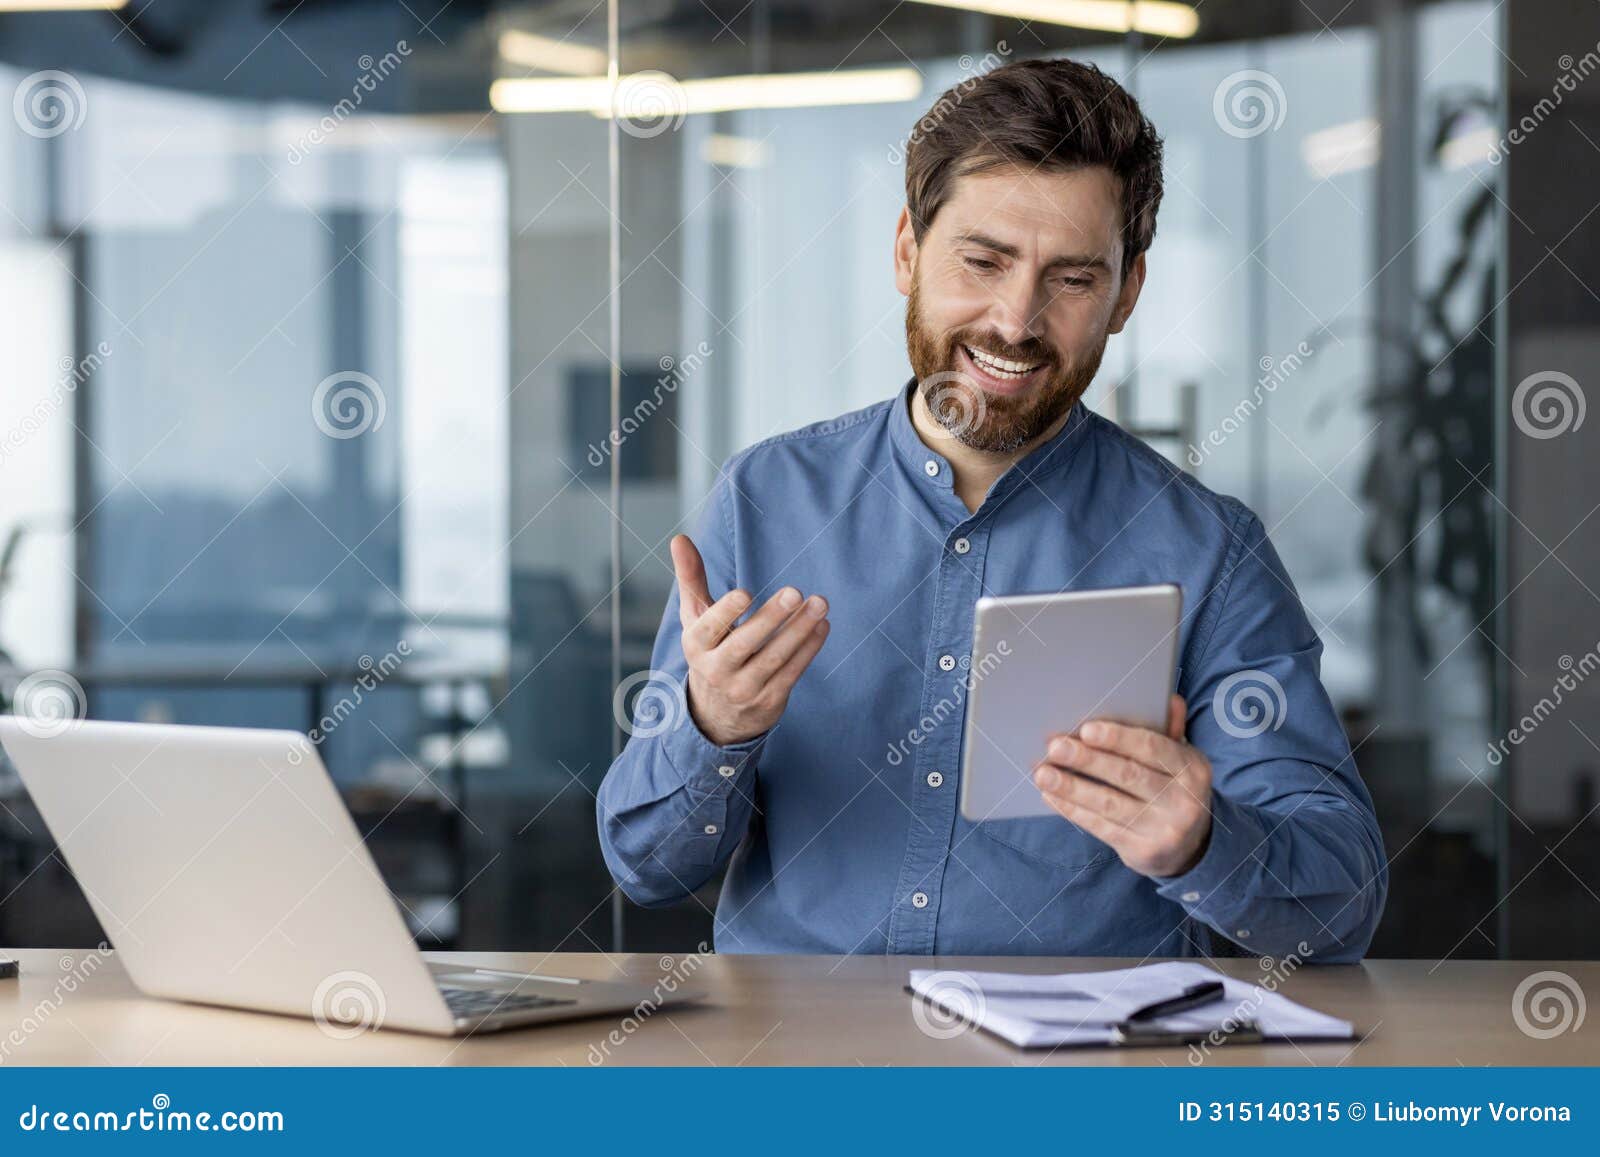 a young man sits in the office at a desk with a laptop and smilingly talks on a video call on a tablet